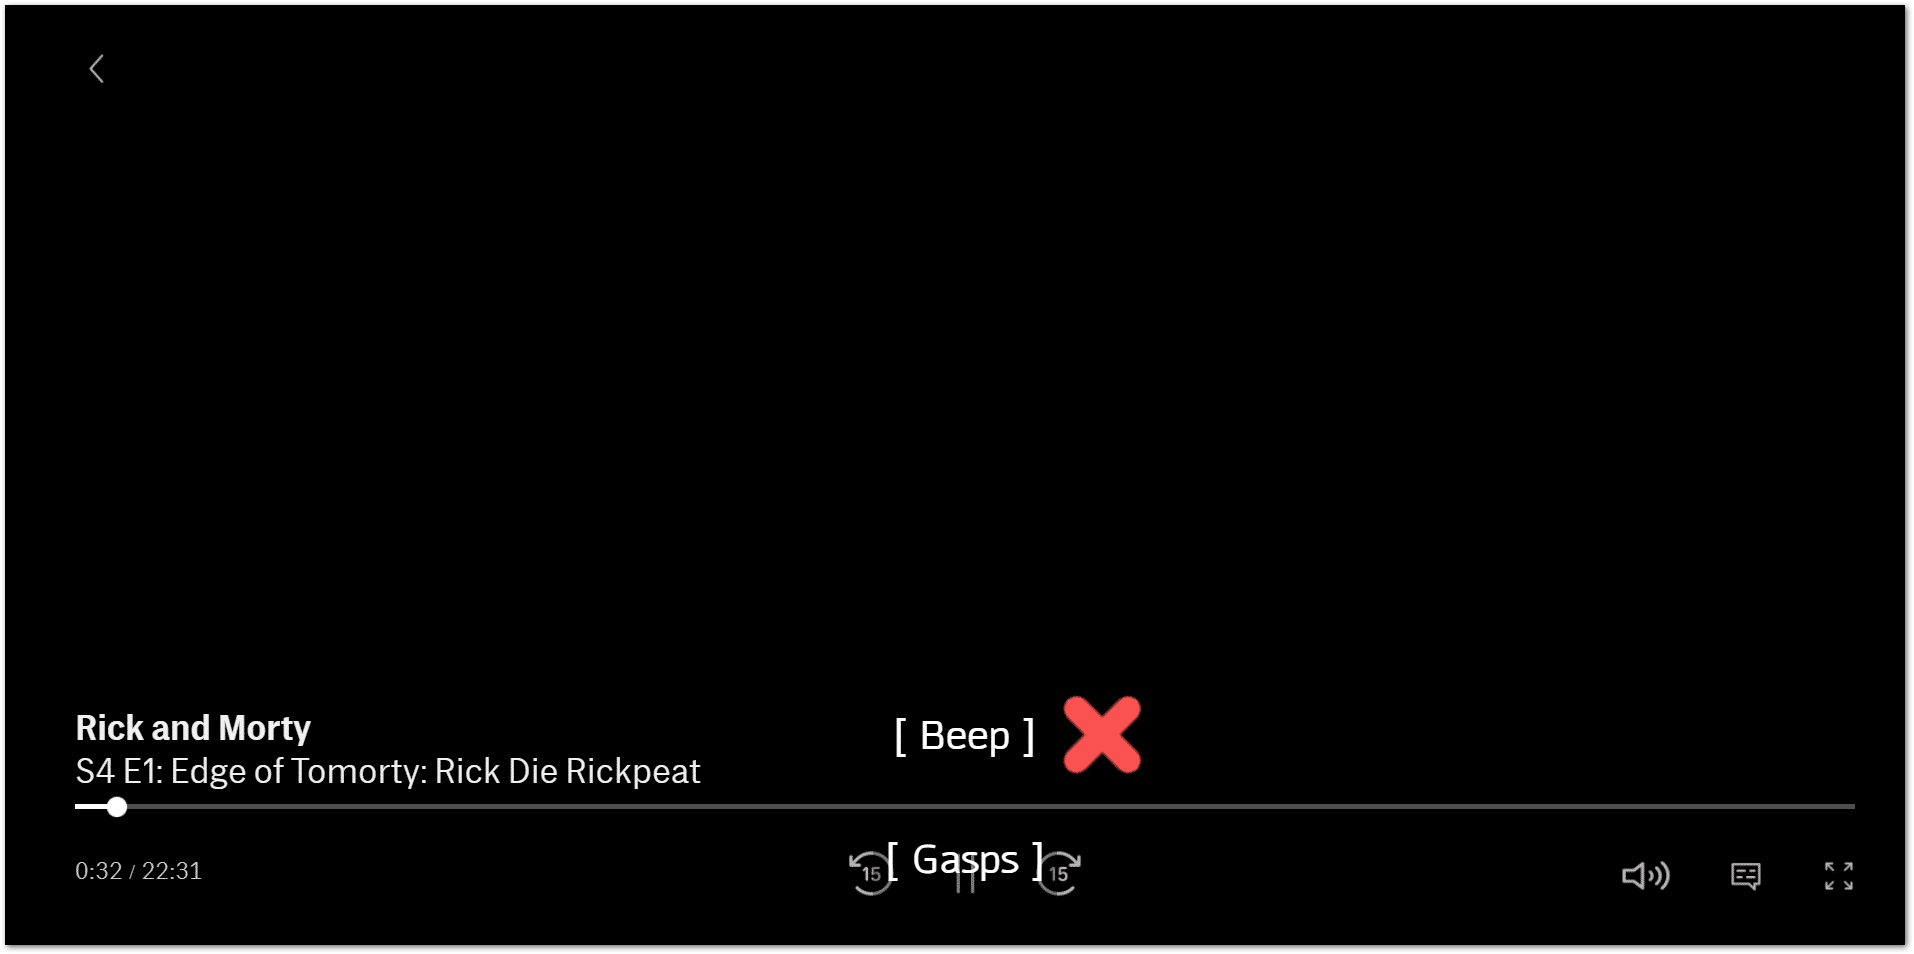 HBO Max subtitles or closed captions not working or showing